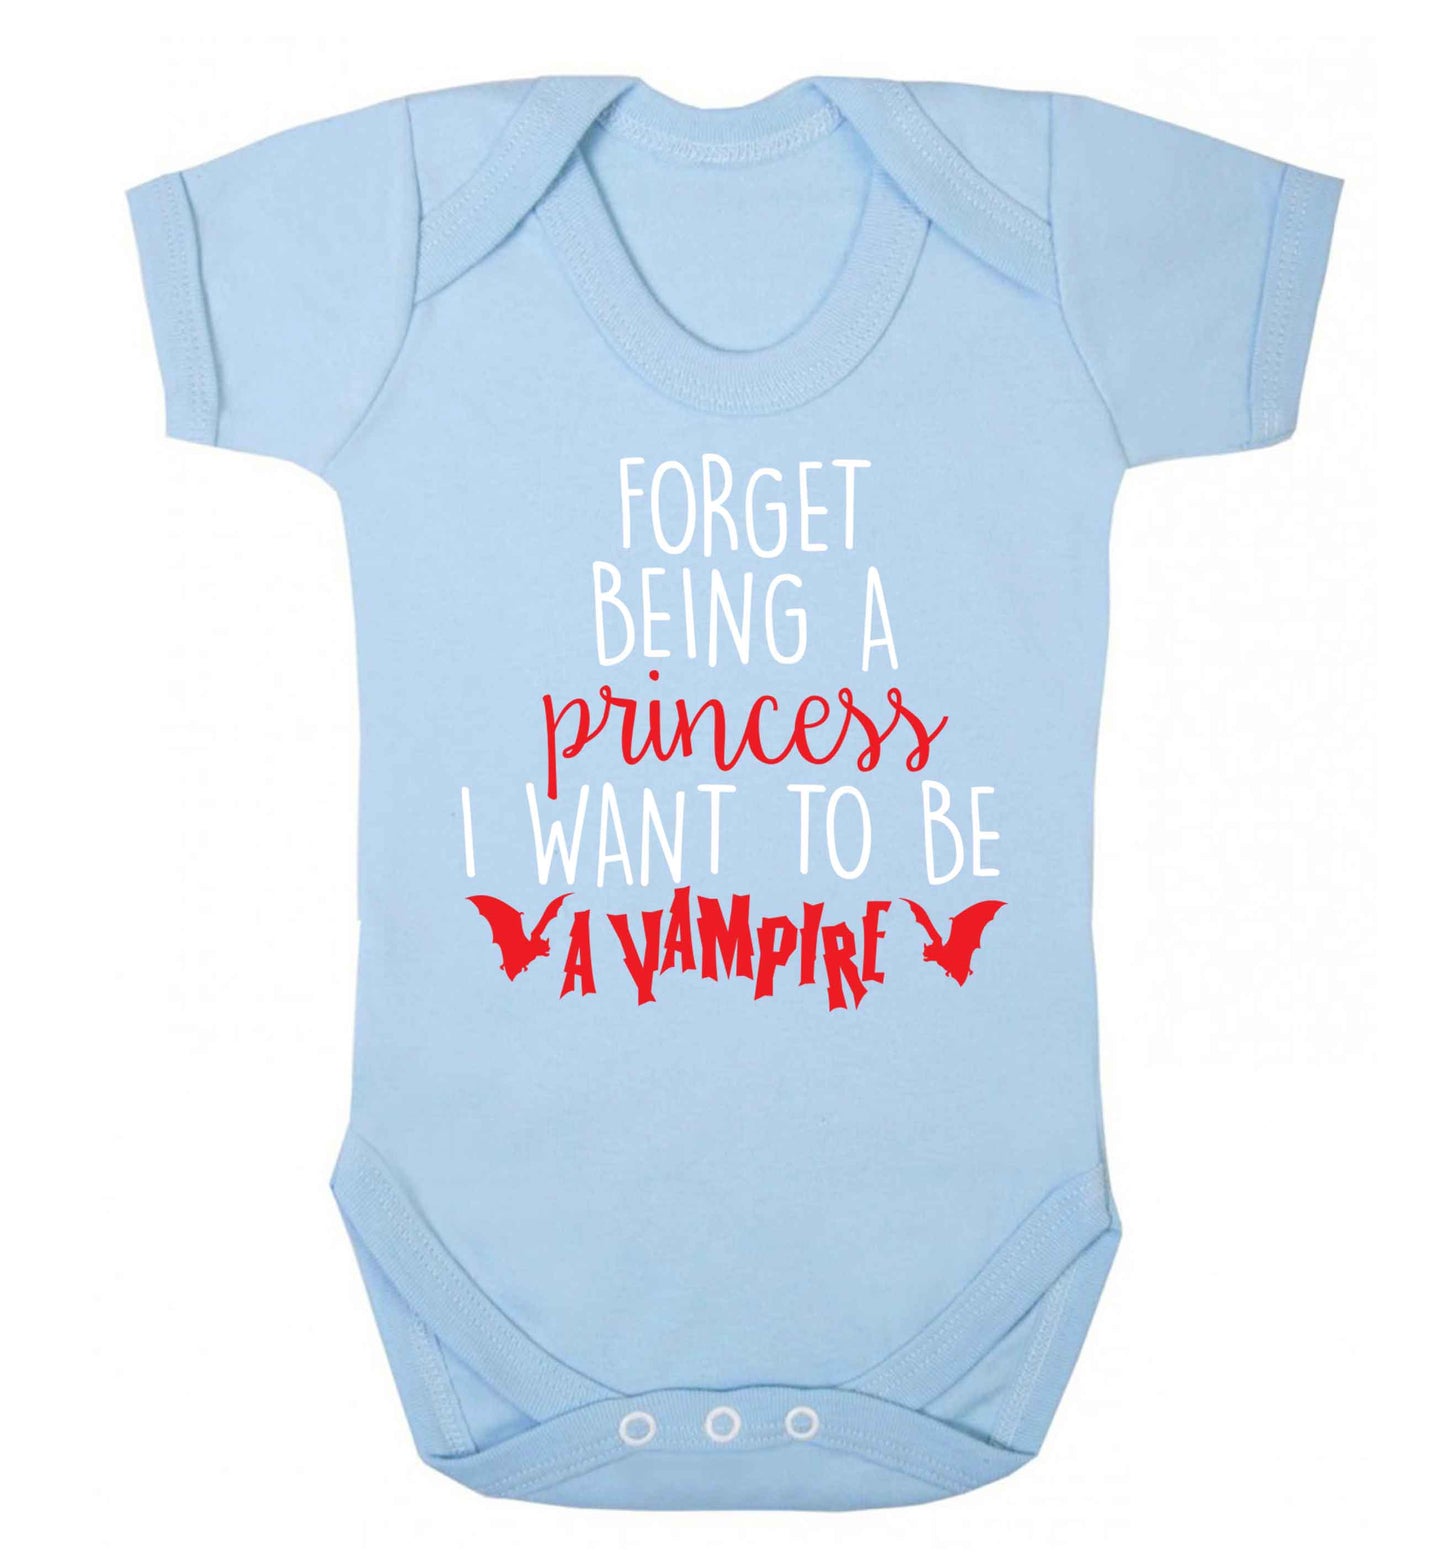 Forget being a princess I want to be a vampire Baby Vest pale blue 18-24 months